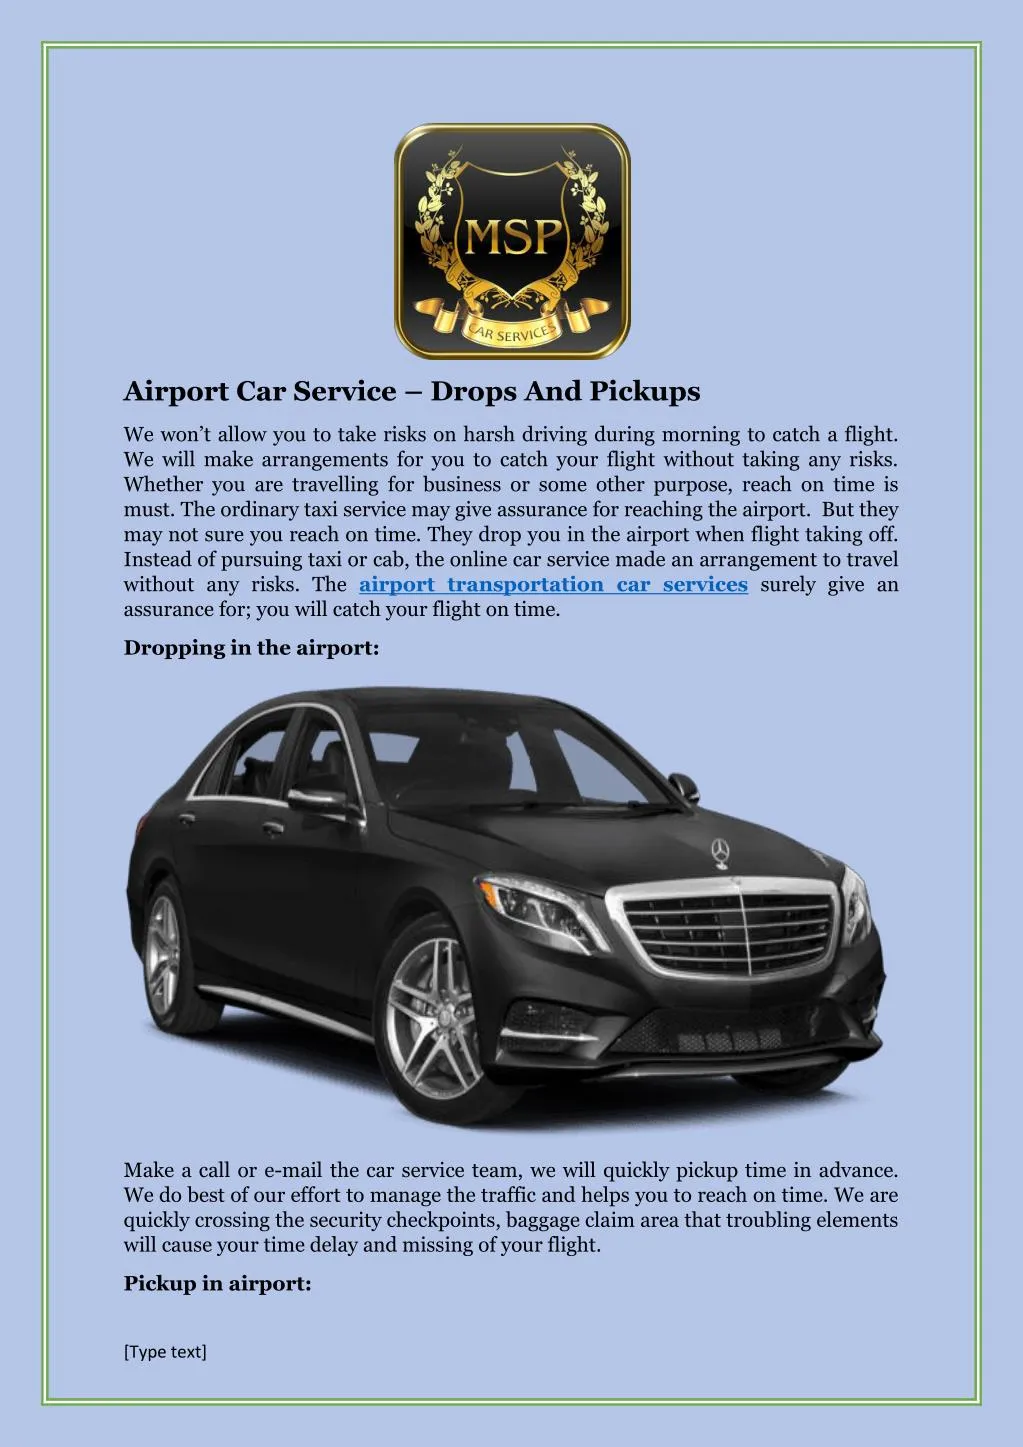 airport car service drops and pickups